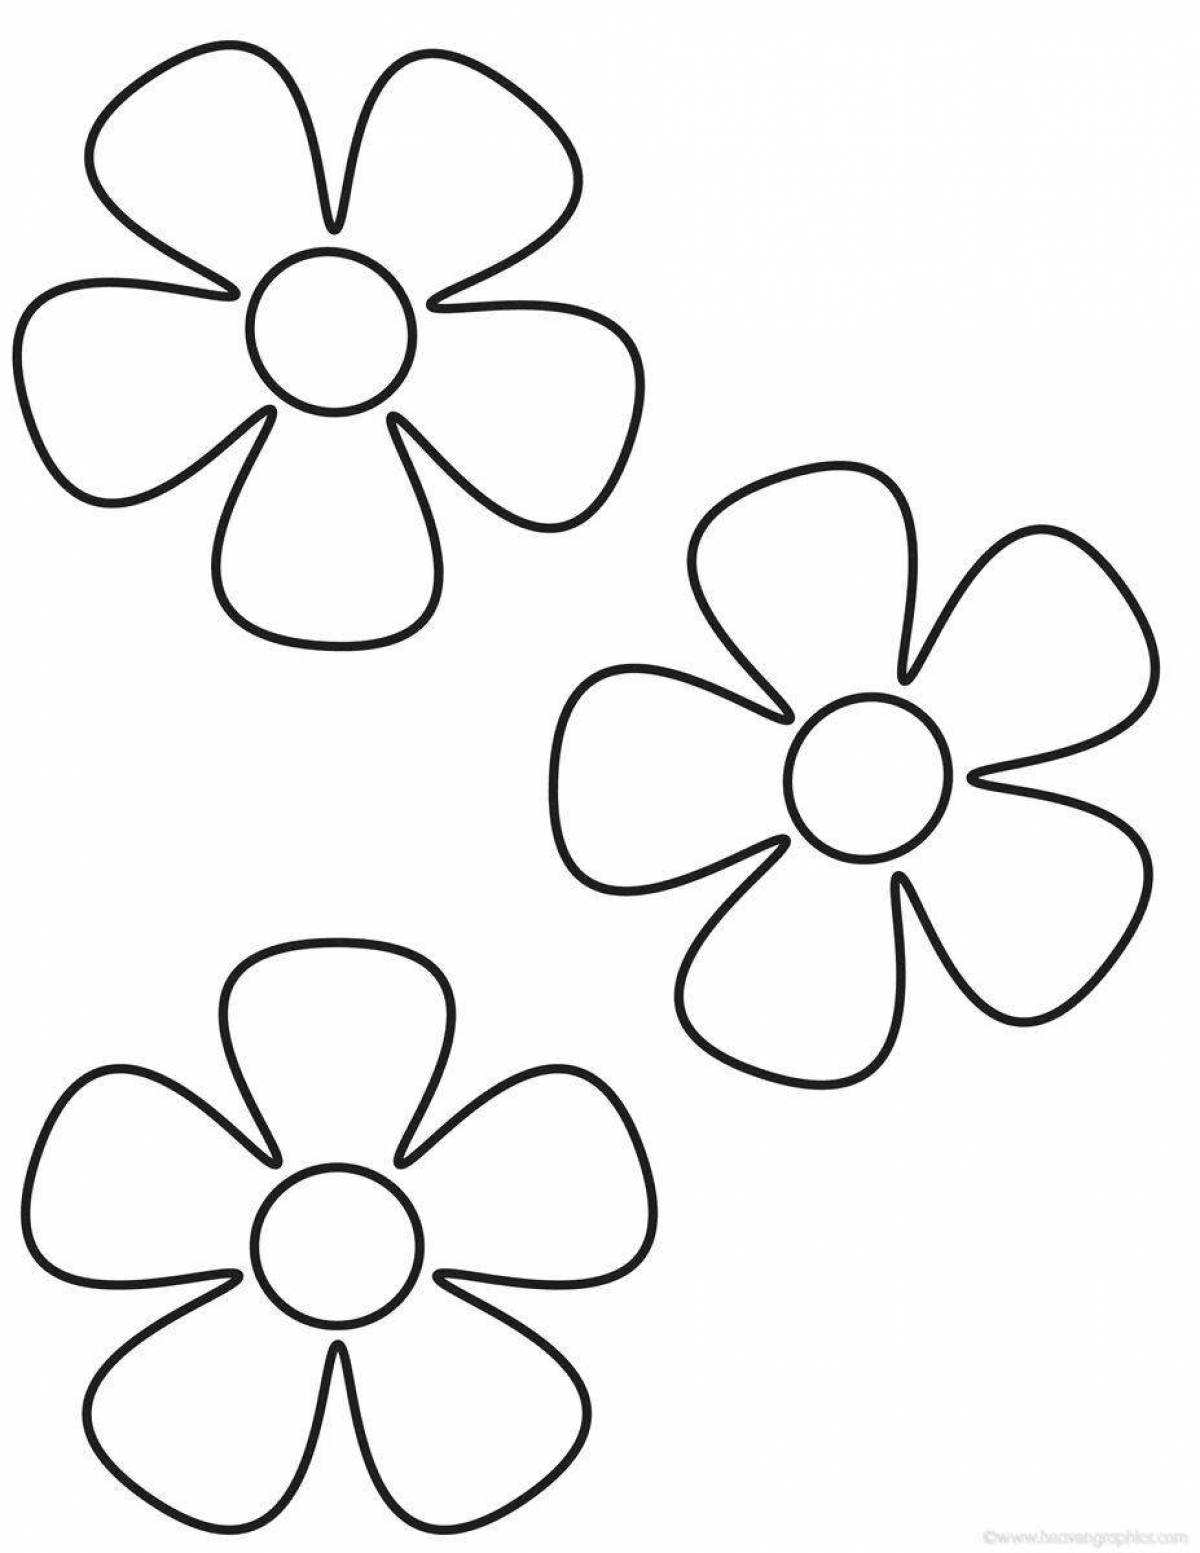 Unique coloring page with flowers